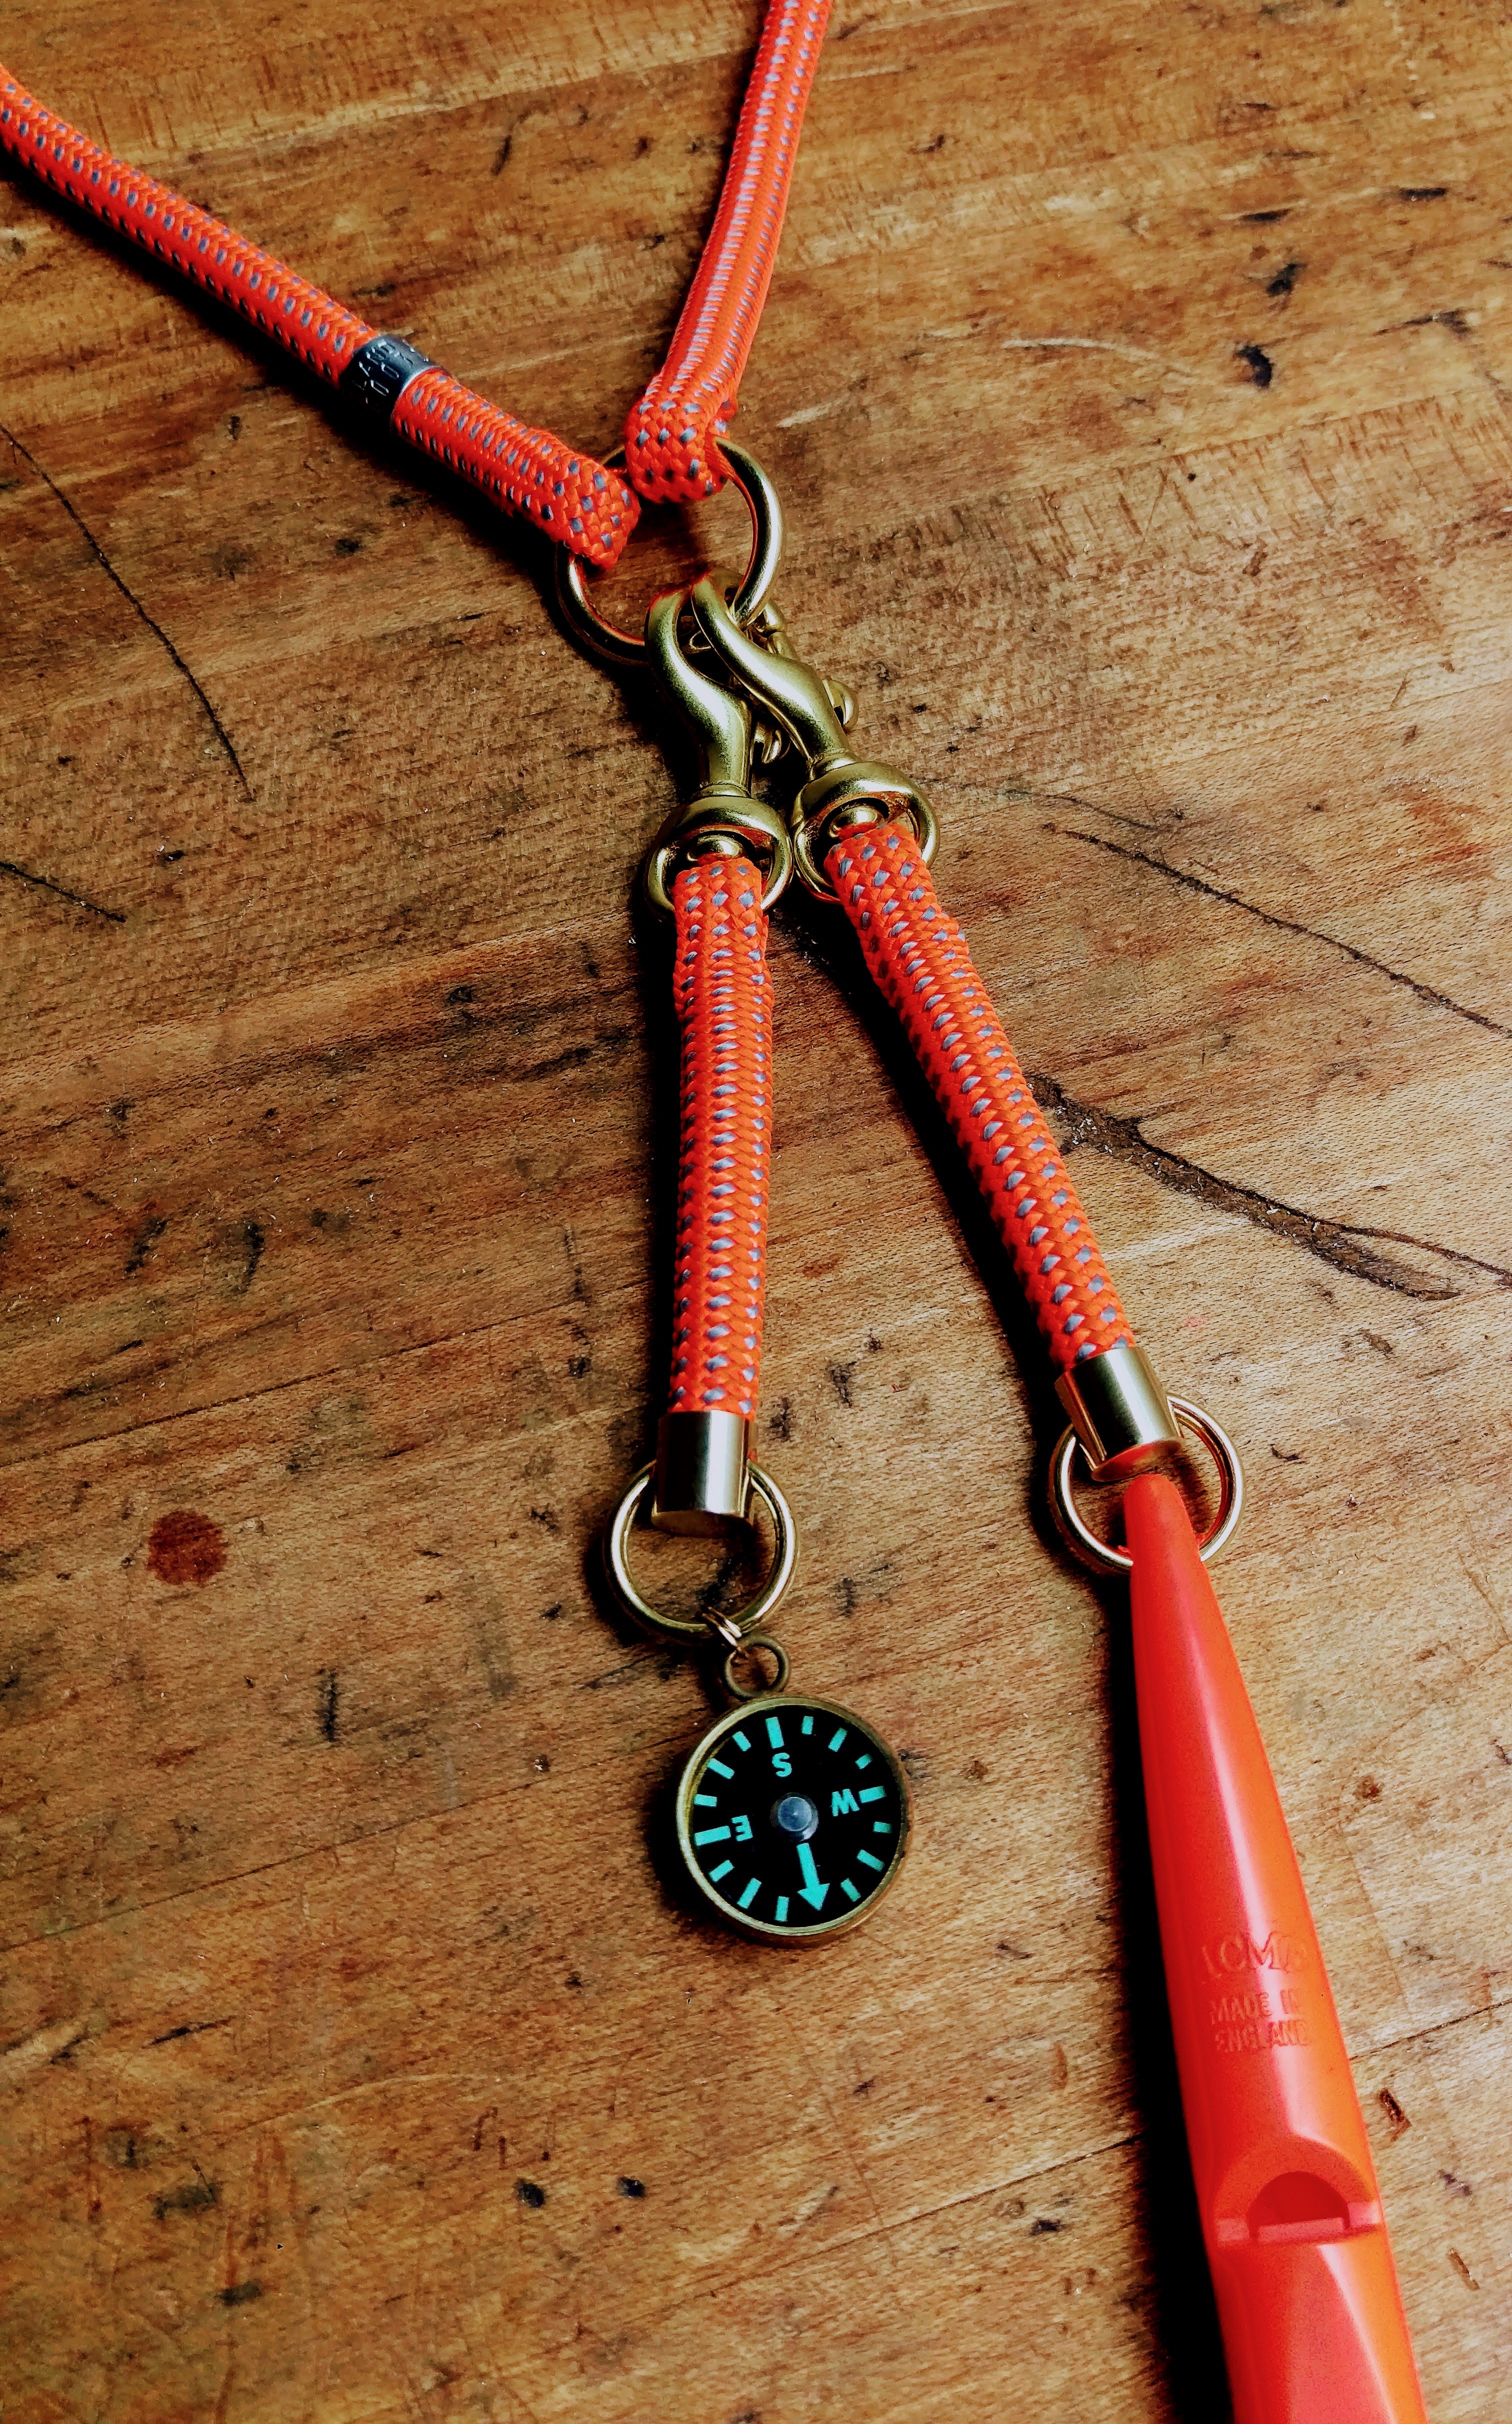 The Upland Lanyard bird hunting gear; detail Compass and Whistle